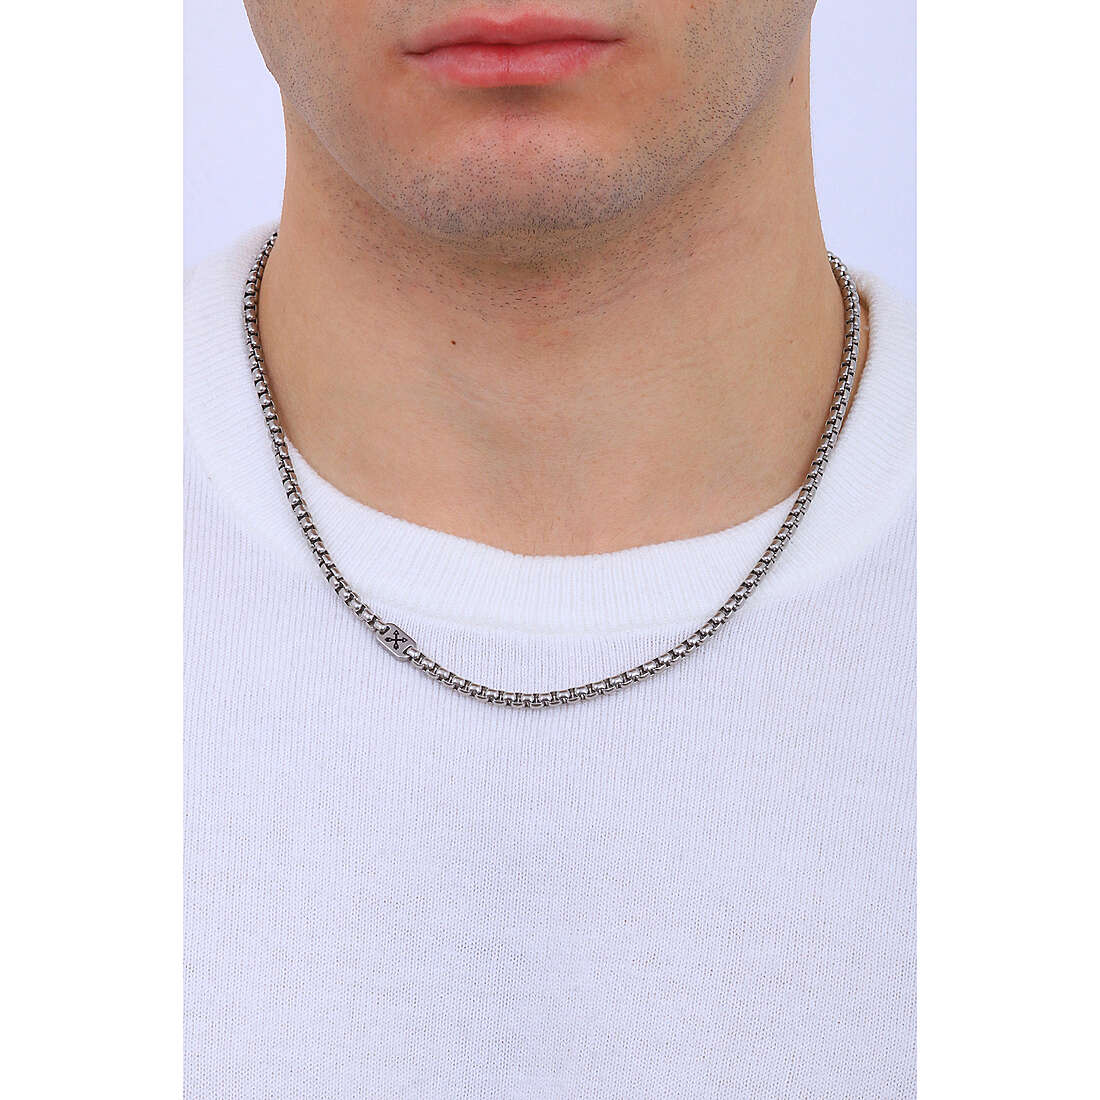 Fossil necklaces Jewelry man JF04336040 wearing